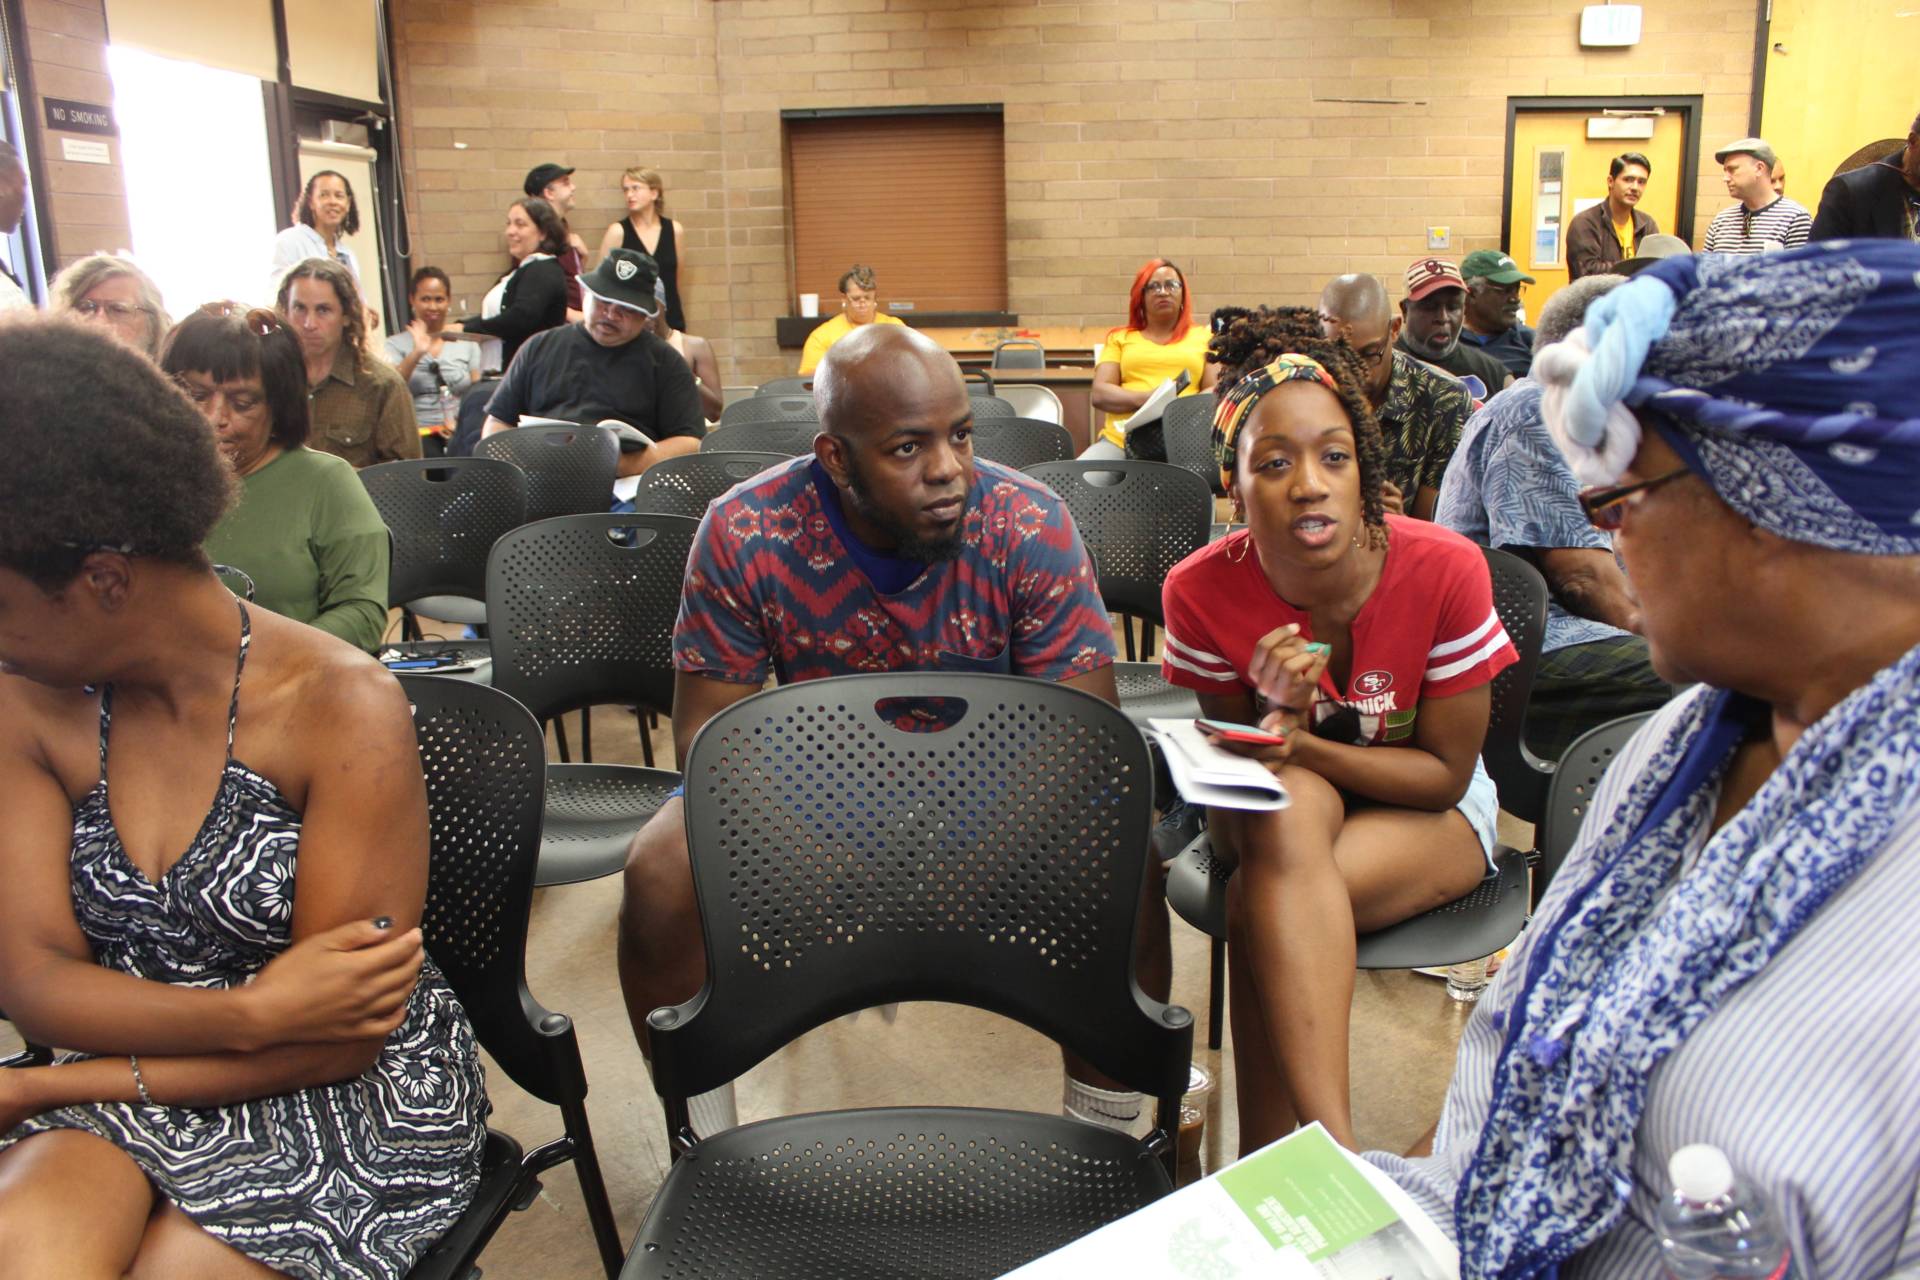 From L-R, Anthony Smith, Solaire Spellen and April Haley talk during a break at the second African-American Tenants Union gathering, the first was held in May. Oakland resident Haley said she learned about the event from friends.